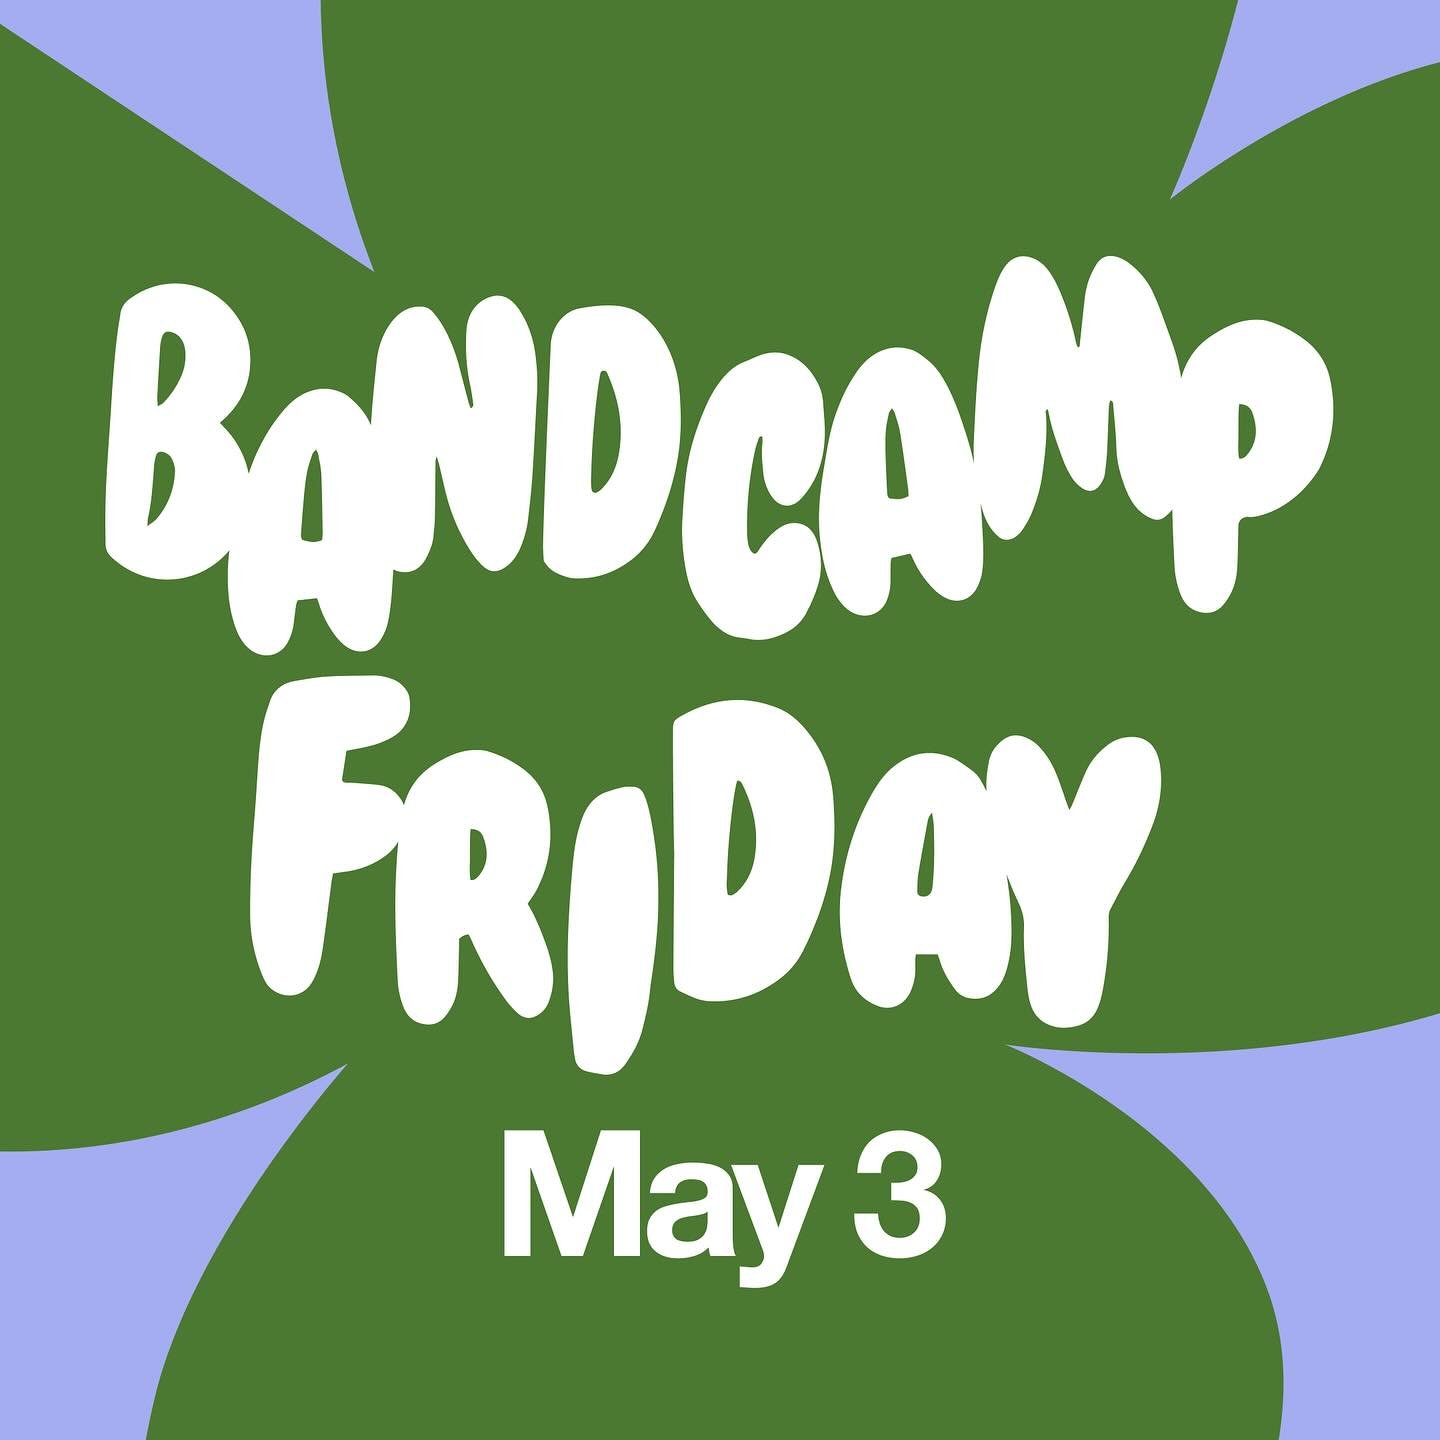 Apparently this Friday is the 40th @bandcamp Friday (!!!!)

This has become such a beautiful tradition. Thinking back to those early pandemic days, when a lot of companies were waking up to the importance of &lsquo;giving back&rsquo; to the humans th